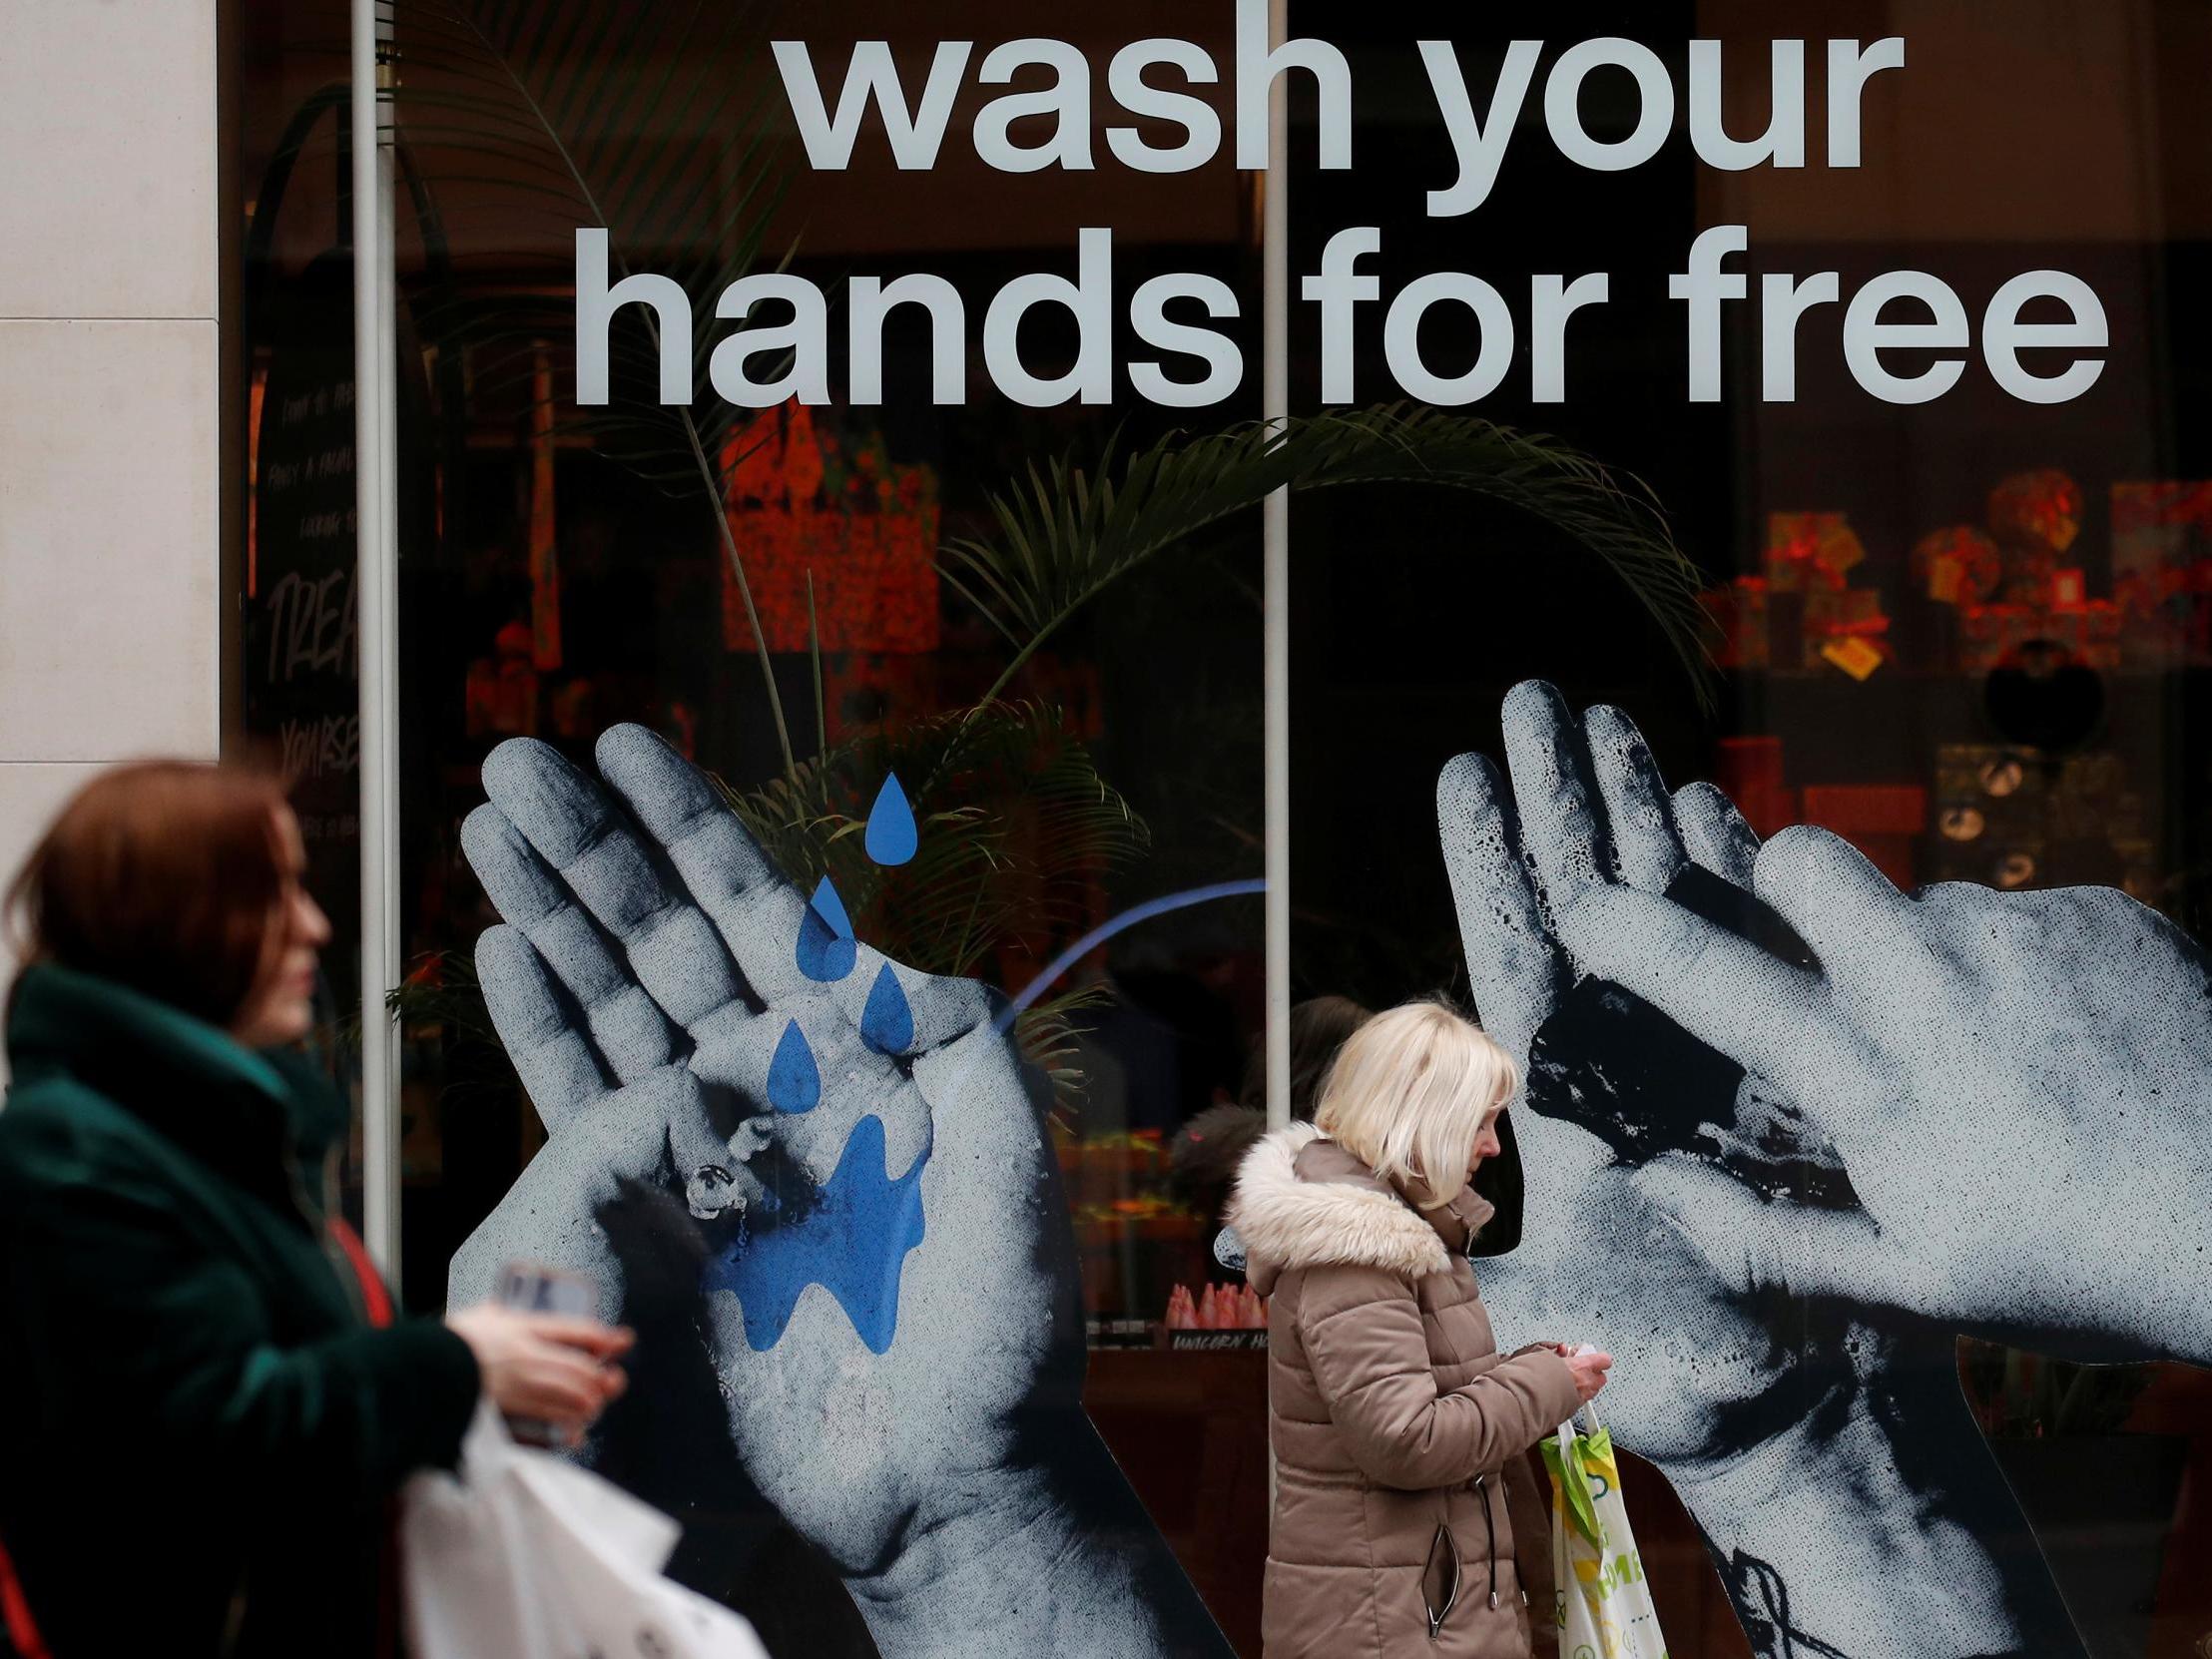 Washing hands protects both the individual and wider community, say experts